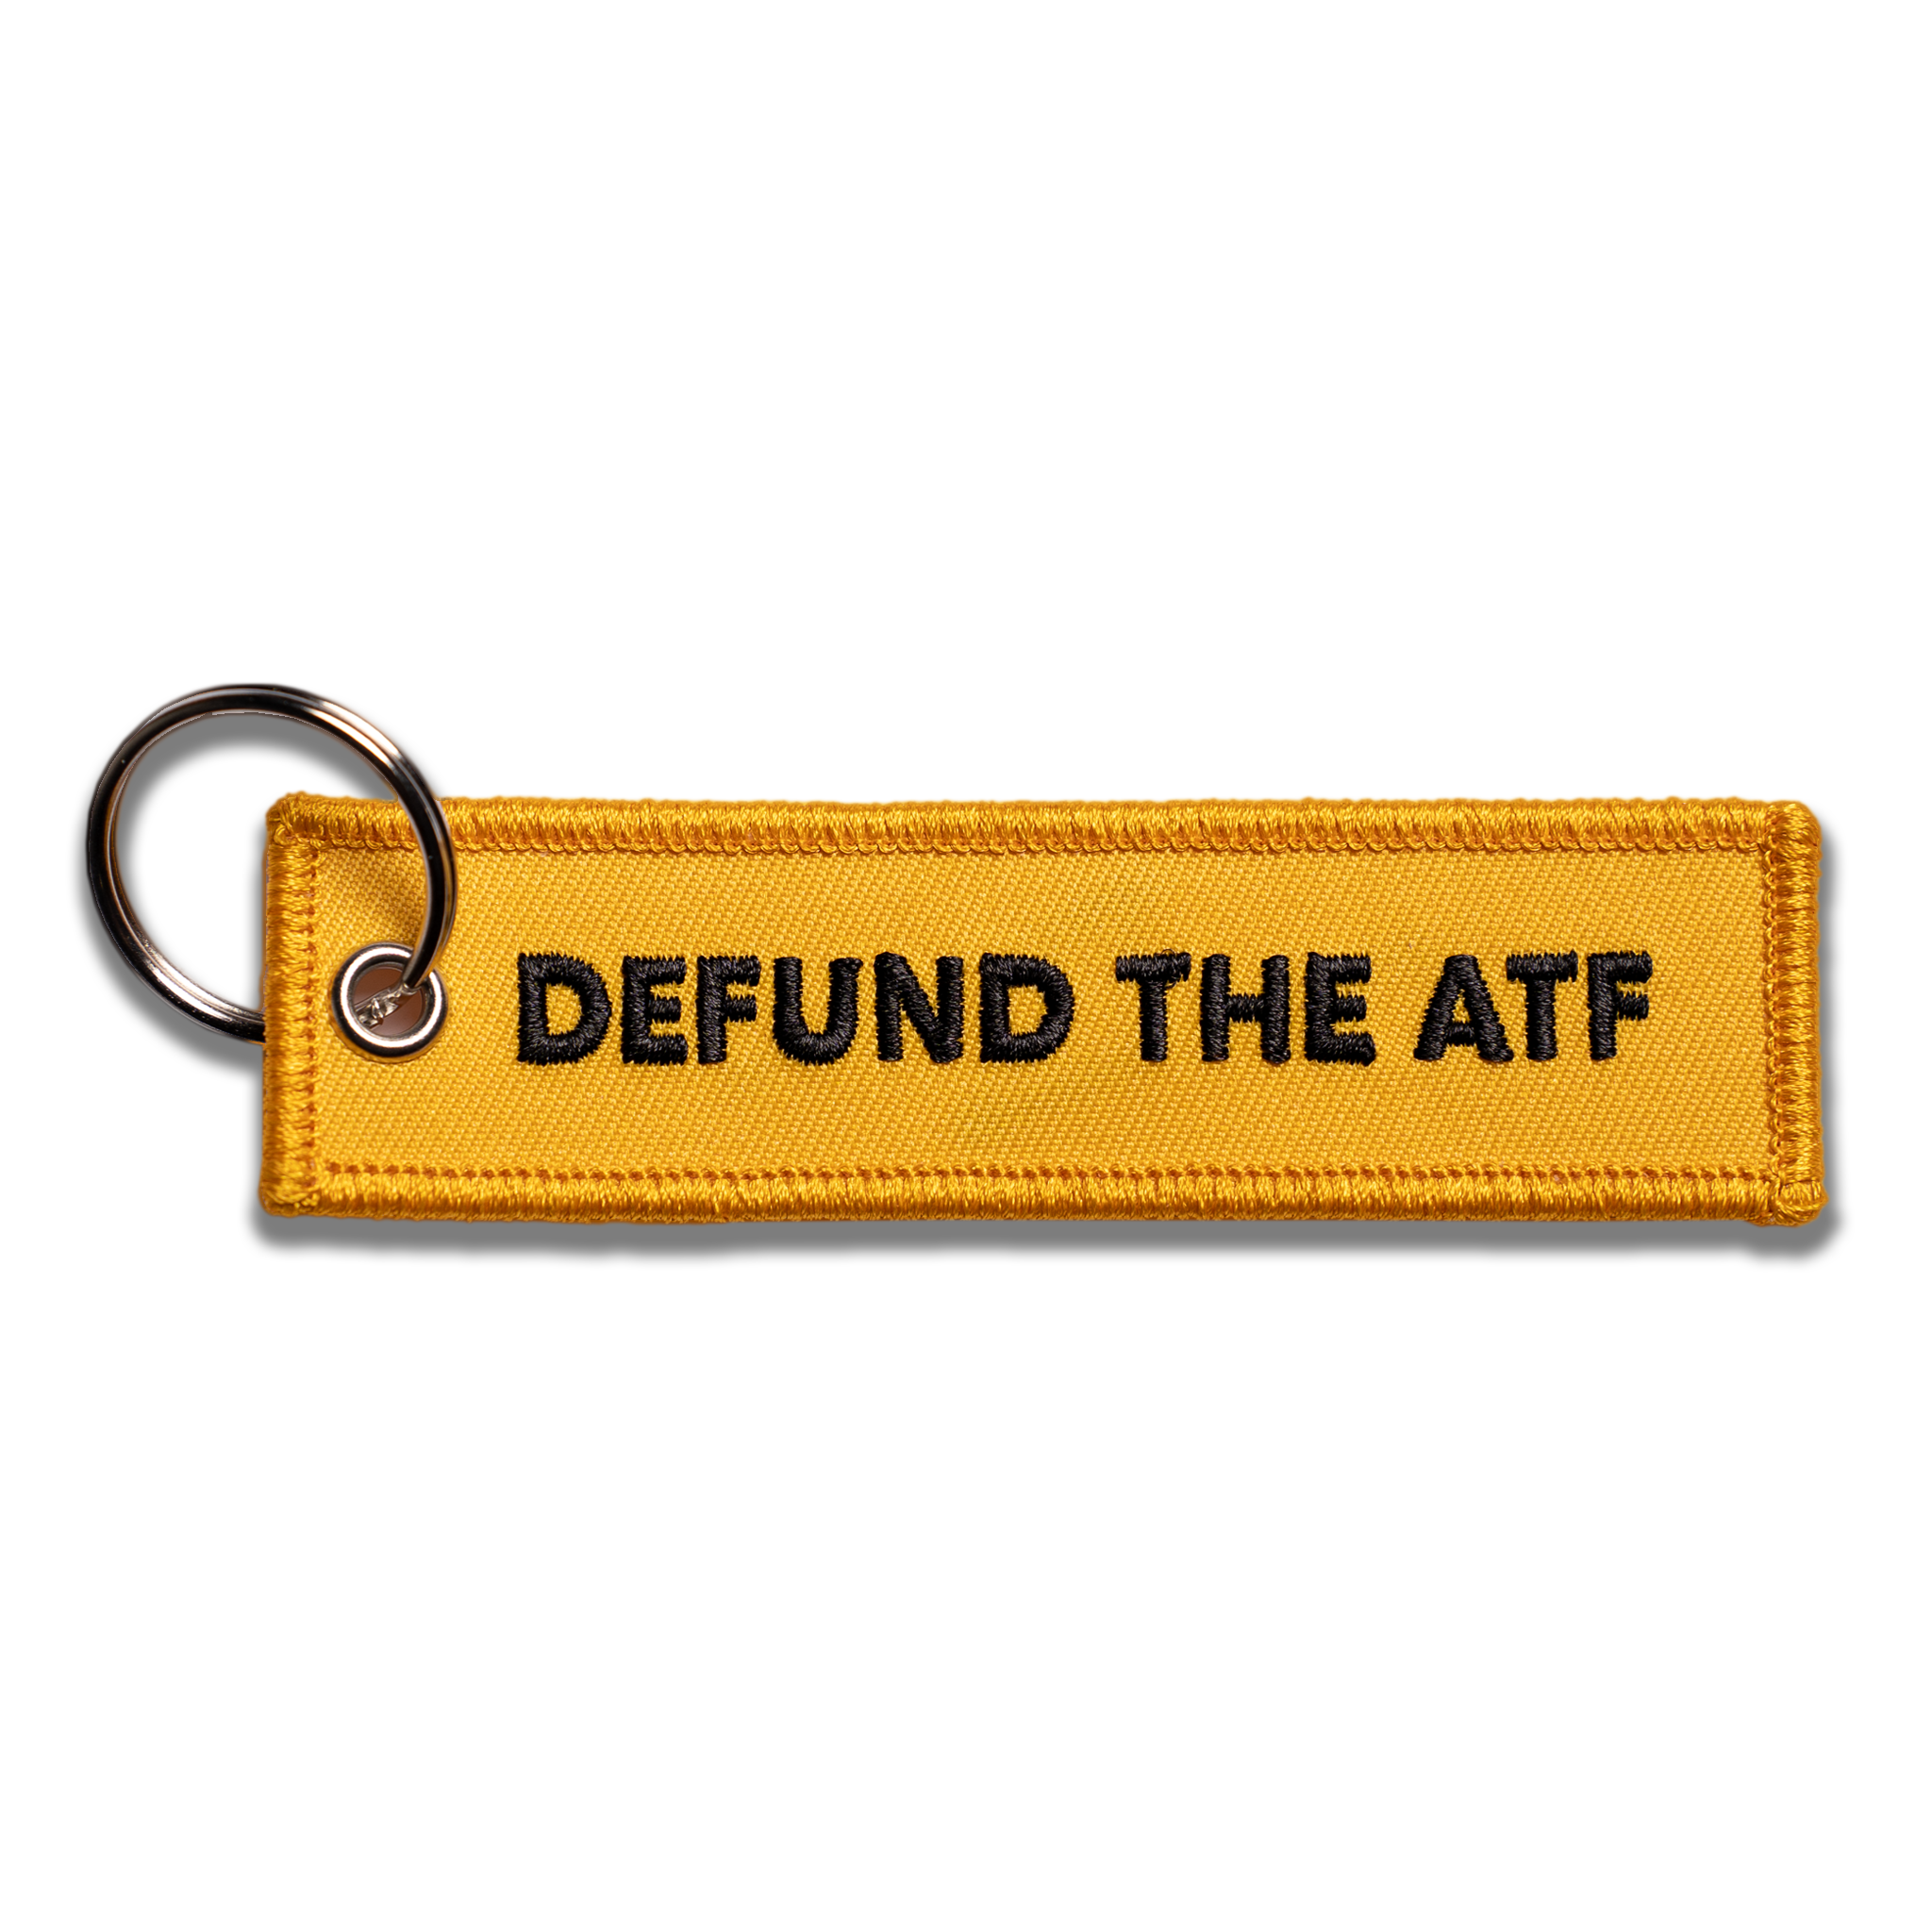 Defund the ATF (Gold/Black Reversed)- Keychain